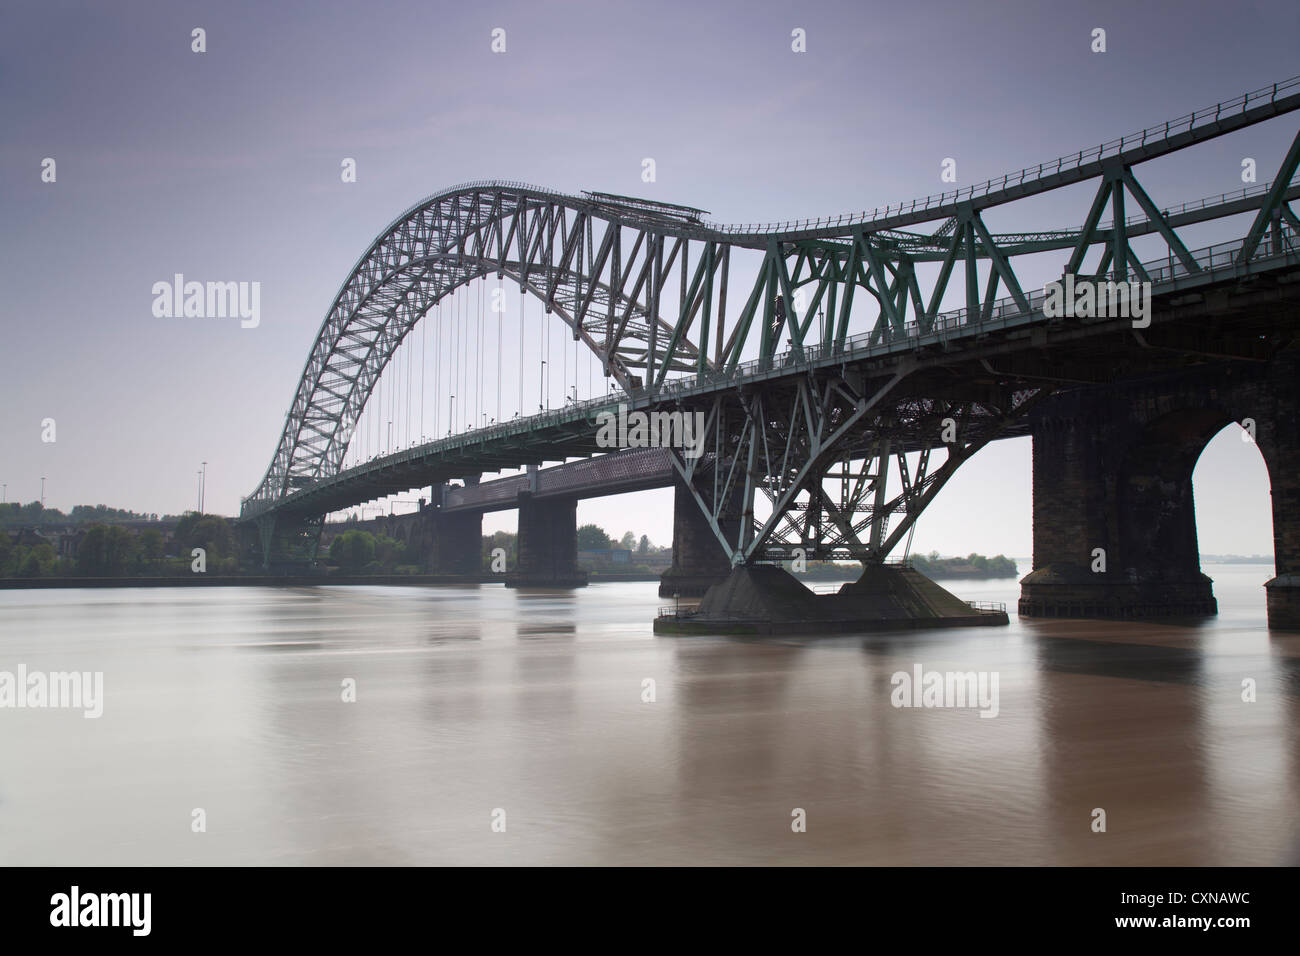 Long exposure day time image of the Runcorn Widnes bridge which spans the river Mersey and Manchester ship canal. Stock Photo